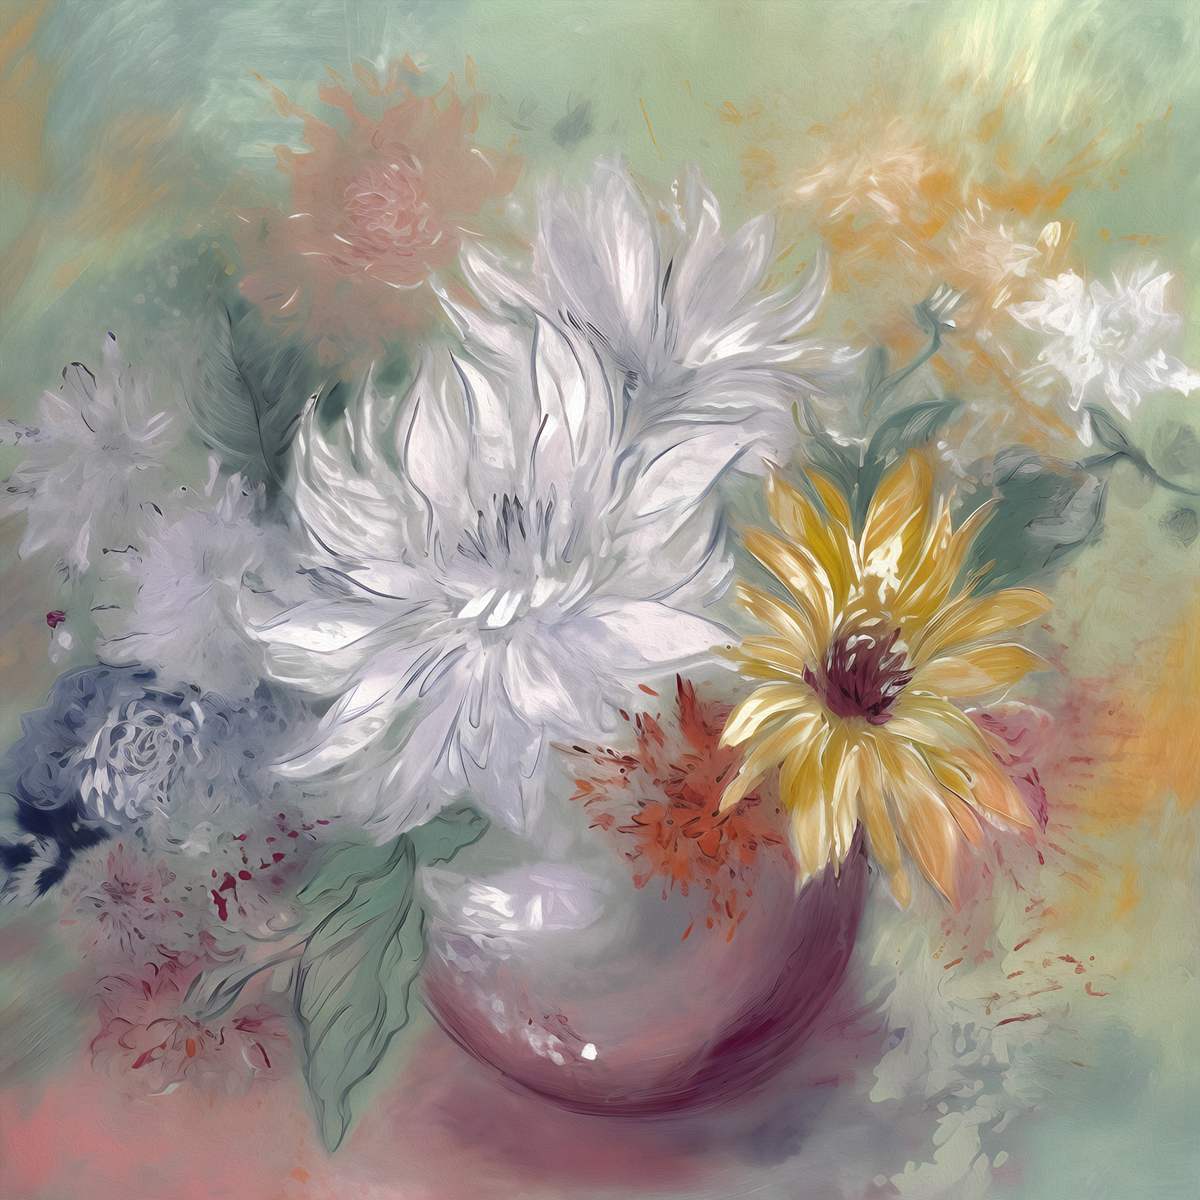  Elegance in Bloom: 'White And Yellow Flowers' Art Collection - Art Print on Canvas. Artemyst